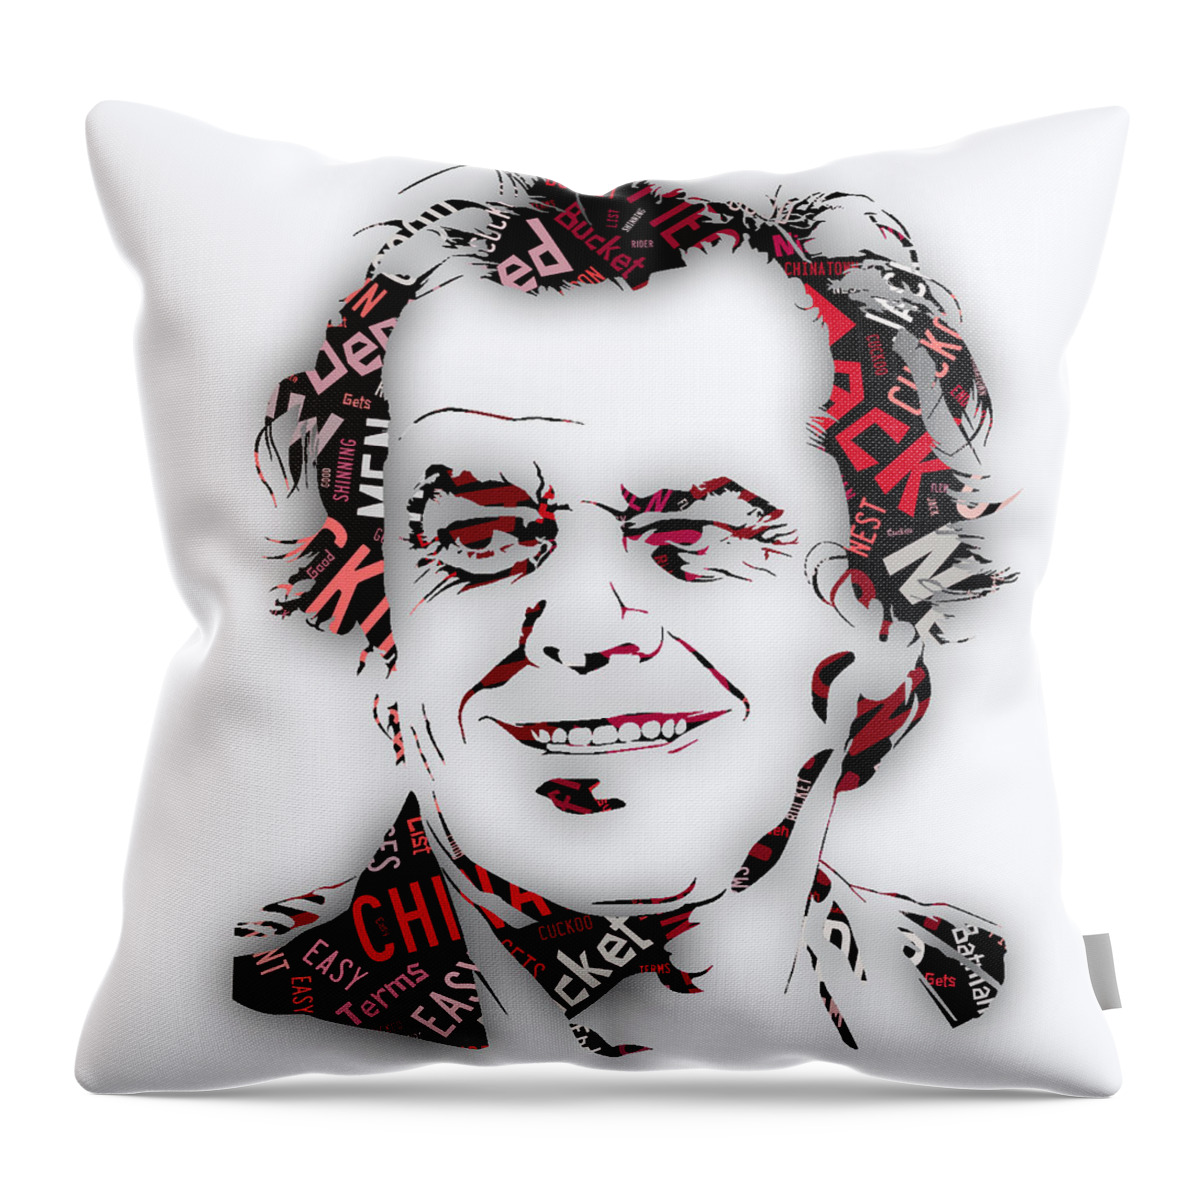 Jack Nicholson Throw Pillow featuring the mixed media Jack Nicholson Movie Titles #2 by Marvin Blaine